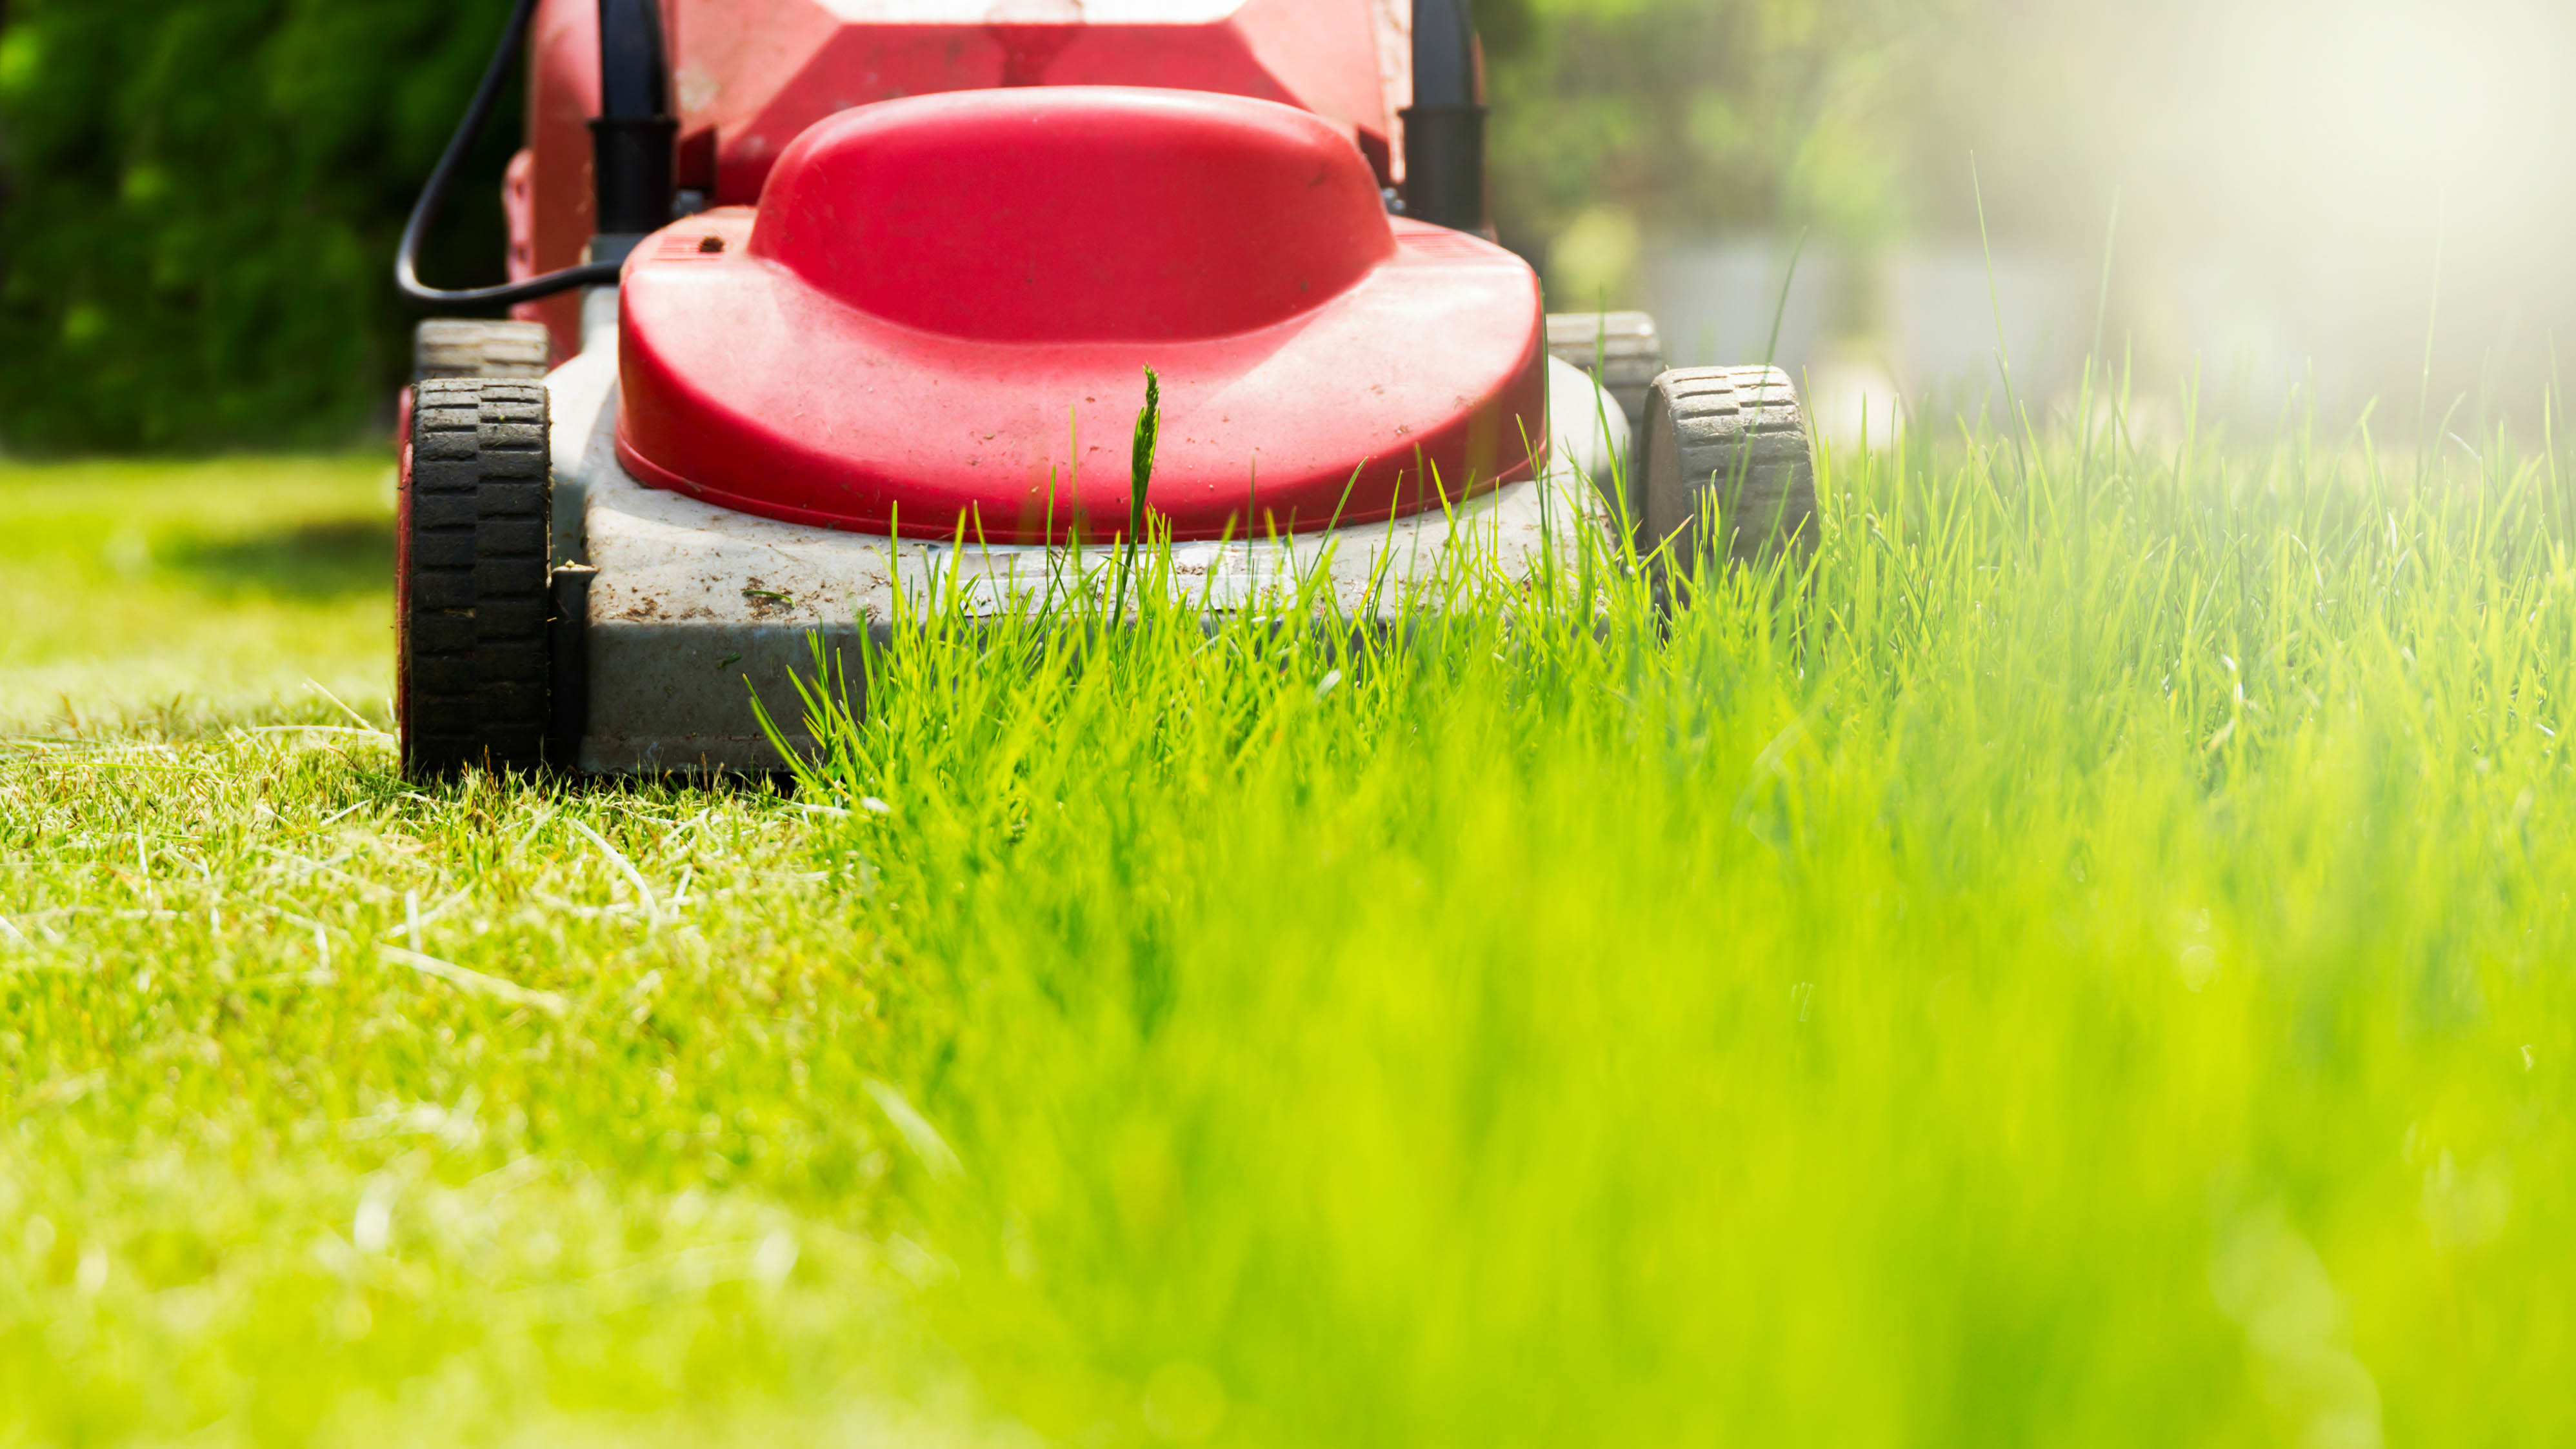 7 common lawn care mistakes you're probably making right now | Tom's Guide